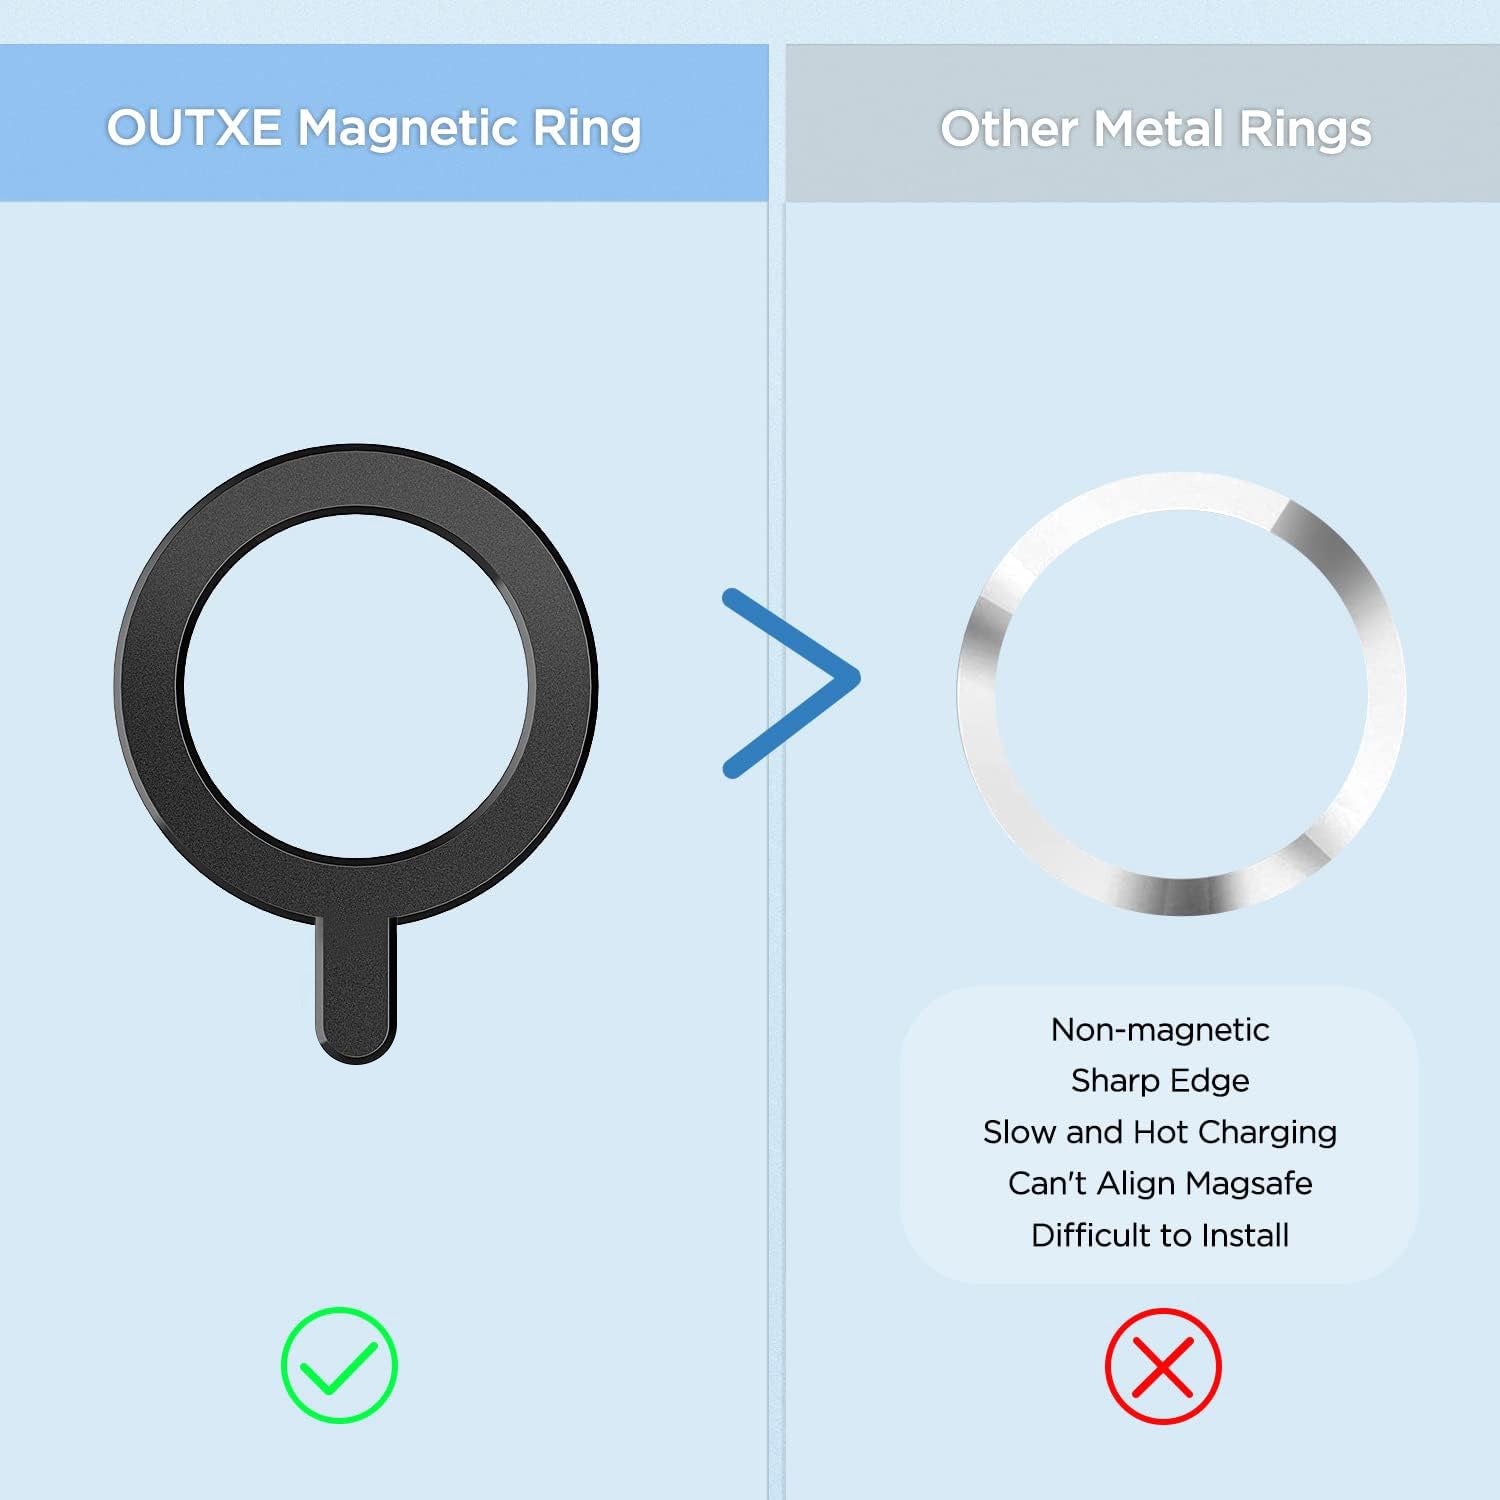 Tough On Universal Magnetic Ring for MagSafe Wireless Charging Conversion Kit